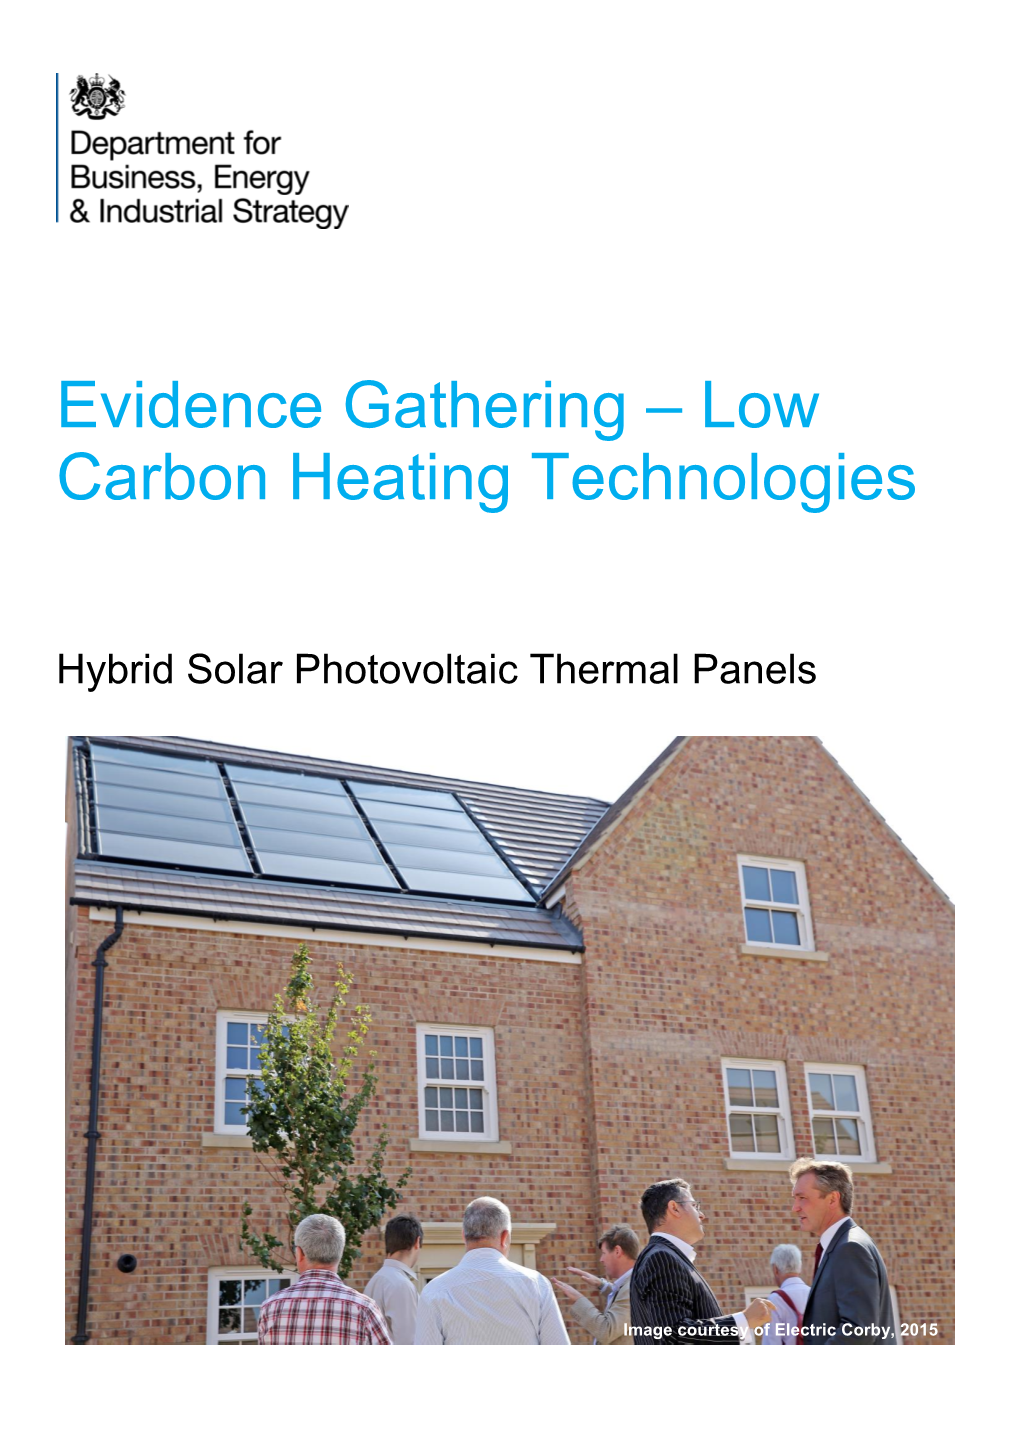 Evidence Gathering – Low Carbon Heating Technologies